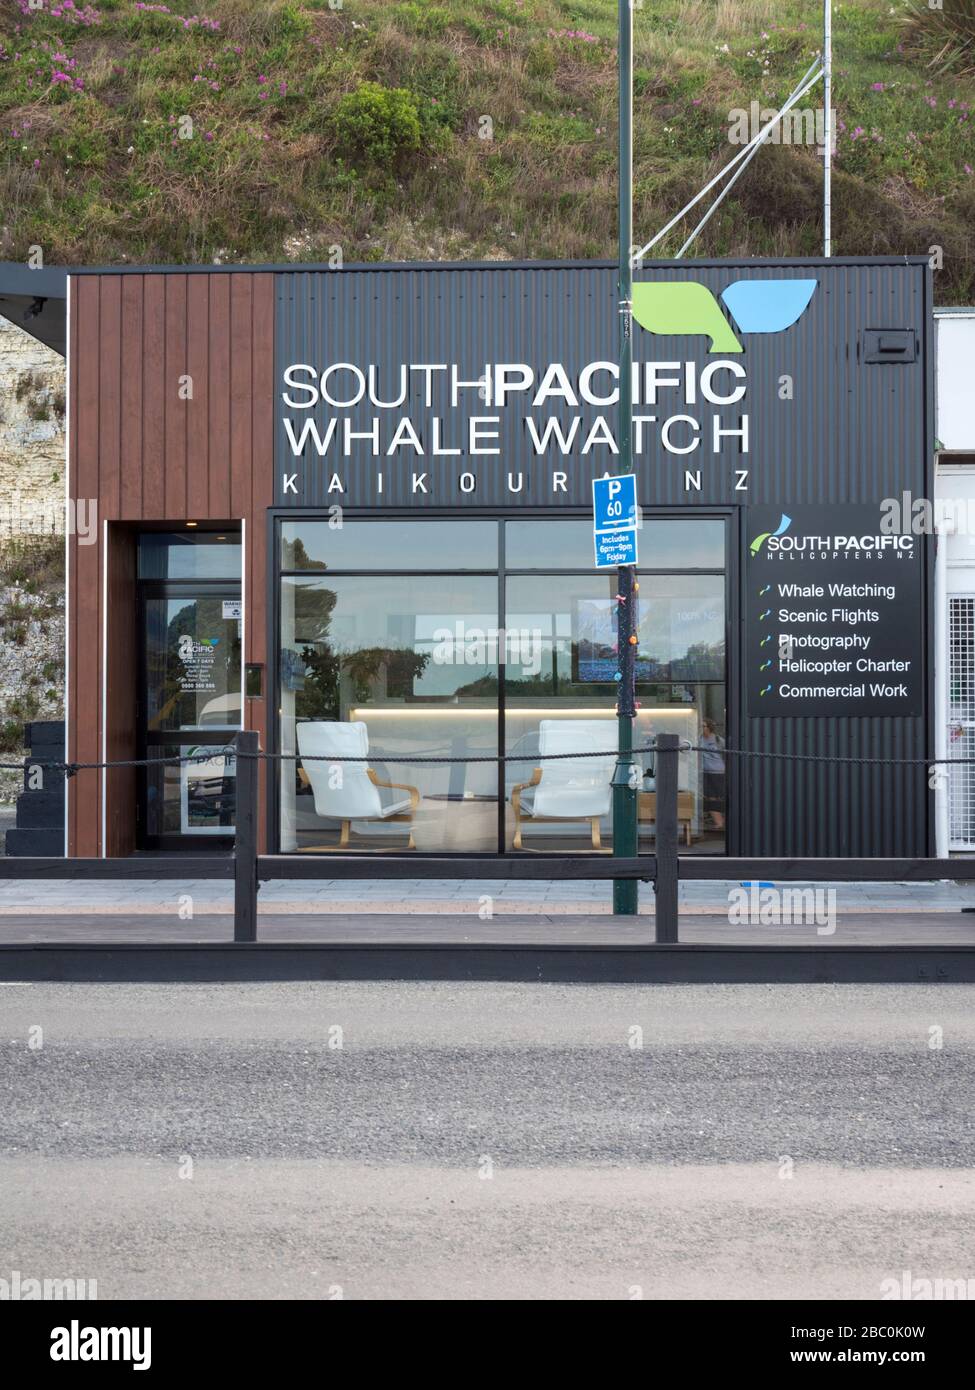 The Southern Pacific Whale Watch company building and booking office at Kaikoura New Zealand. Stock Photo